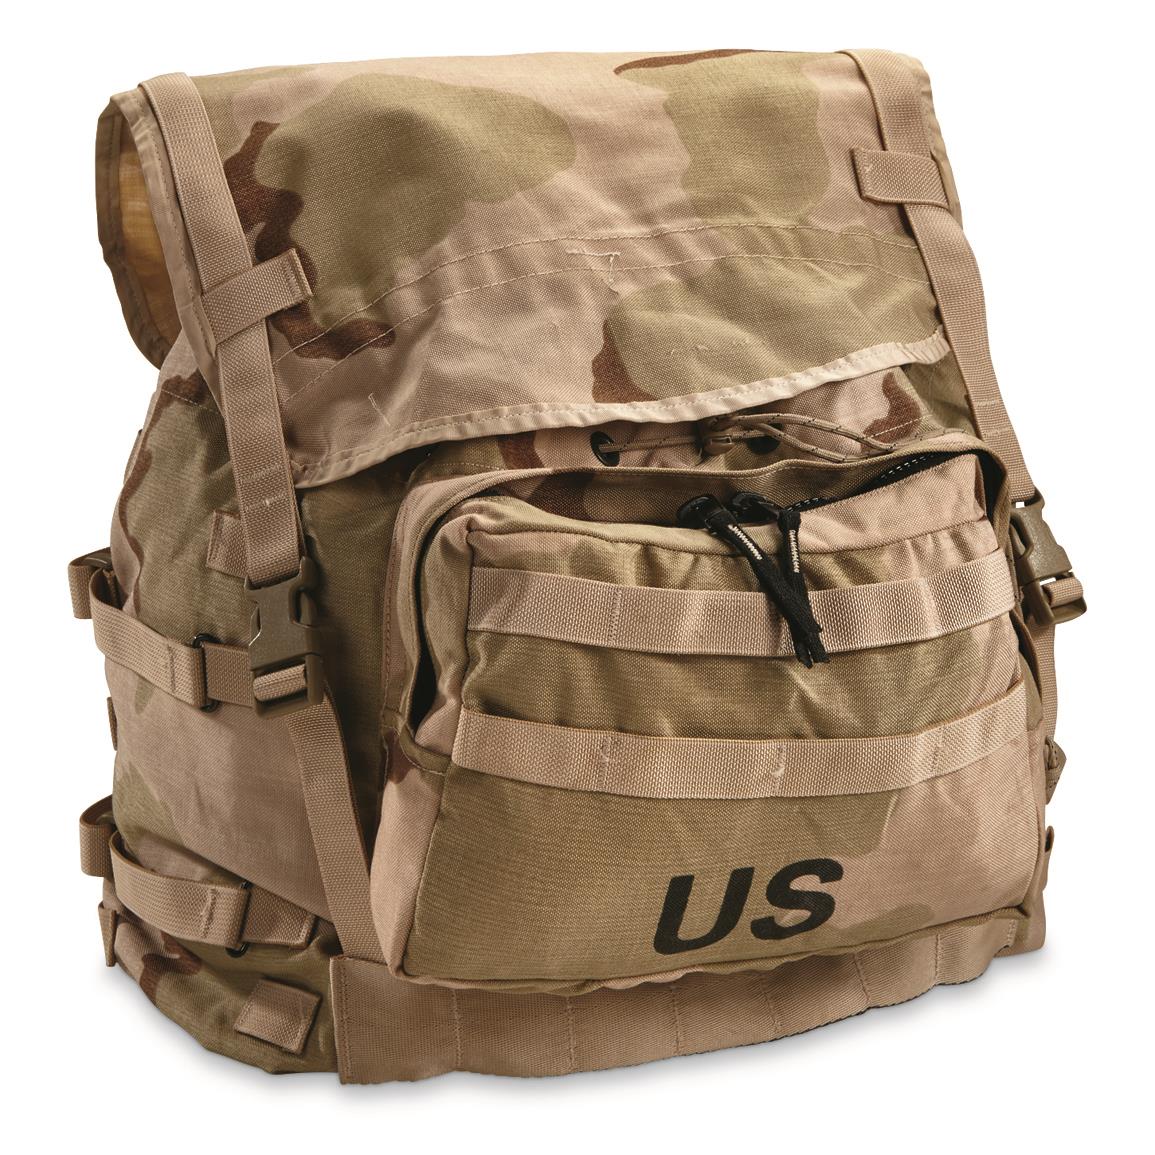 Army Molle Rucksack - Army Military